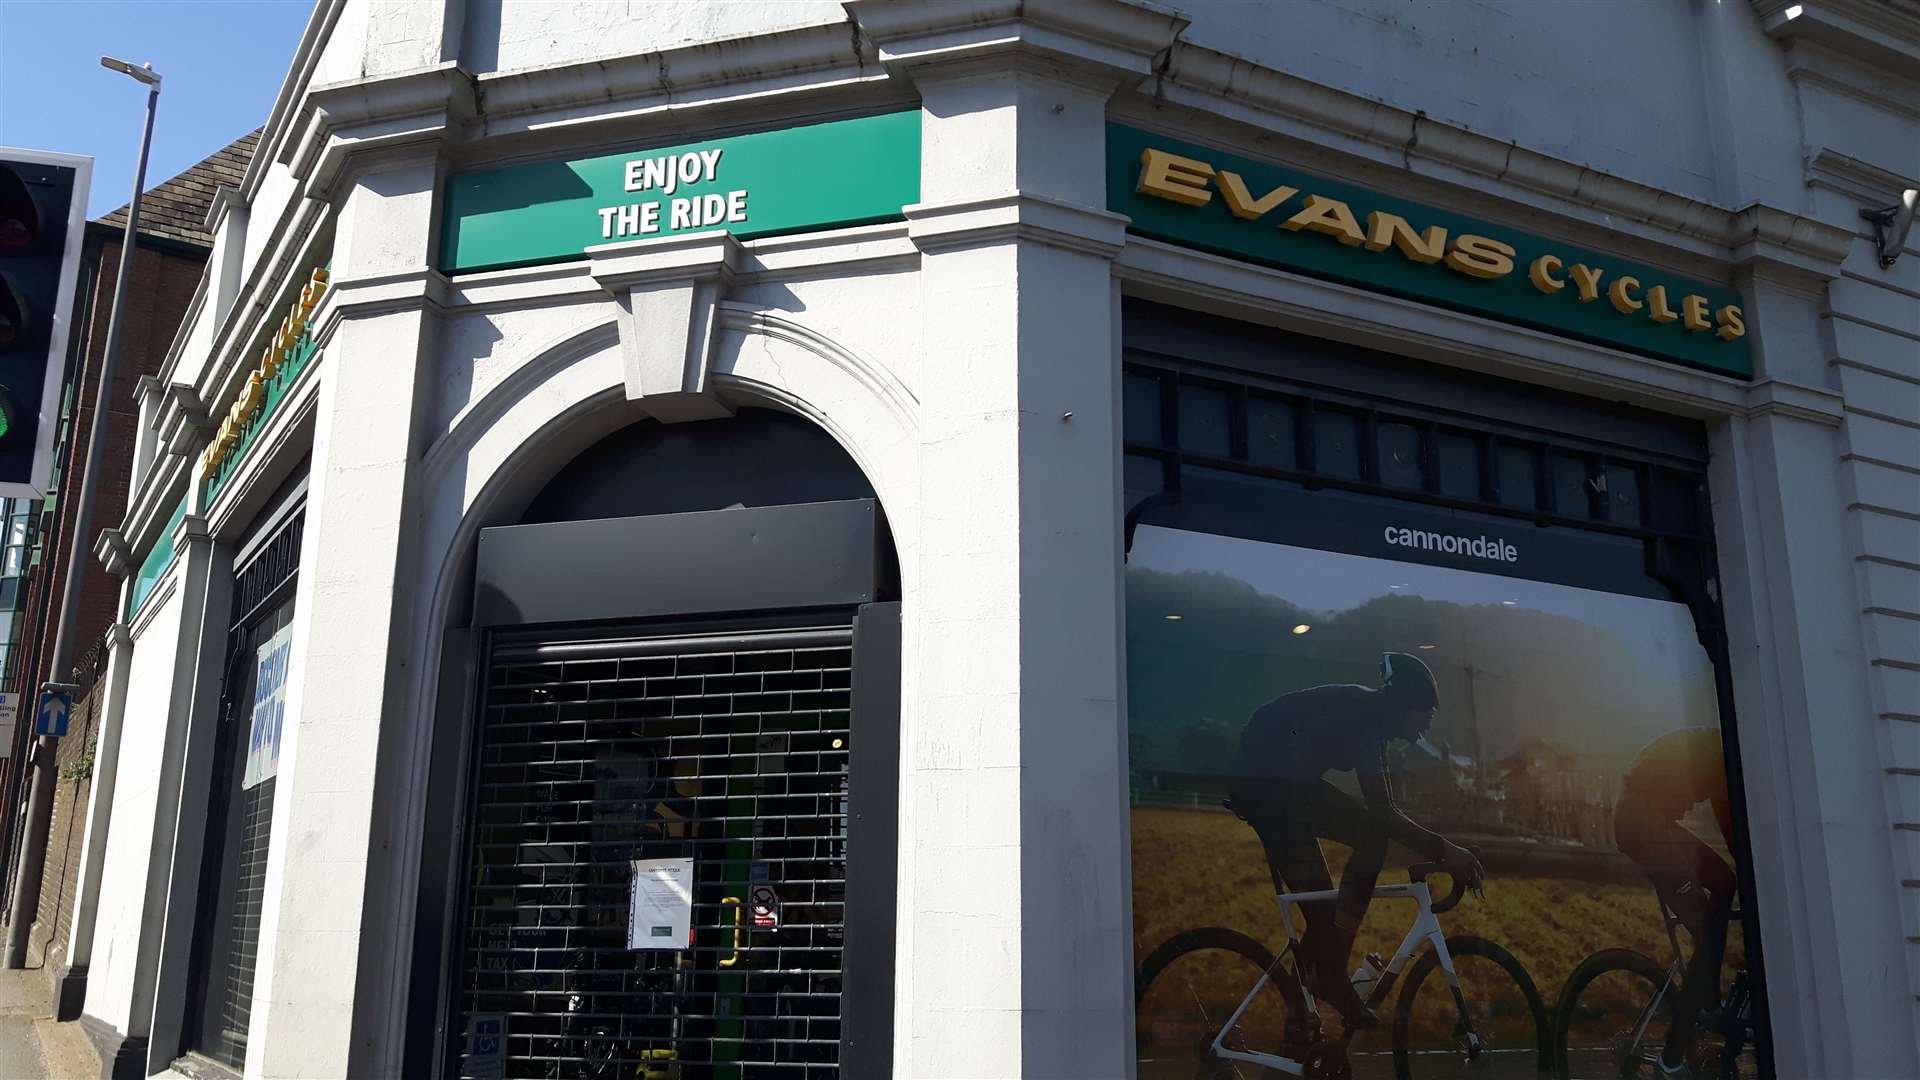 Evans Cycles in Tonbridge Road, Maidstone, had taken the decision to close